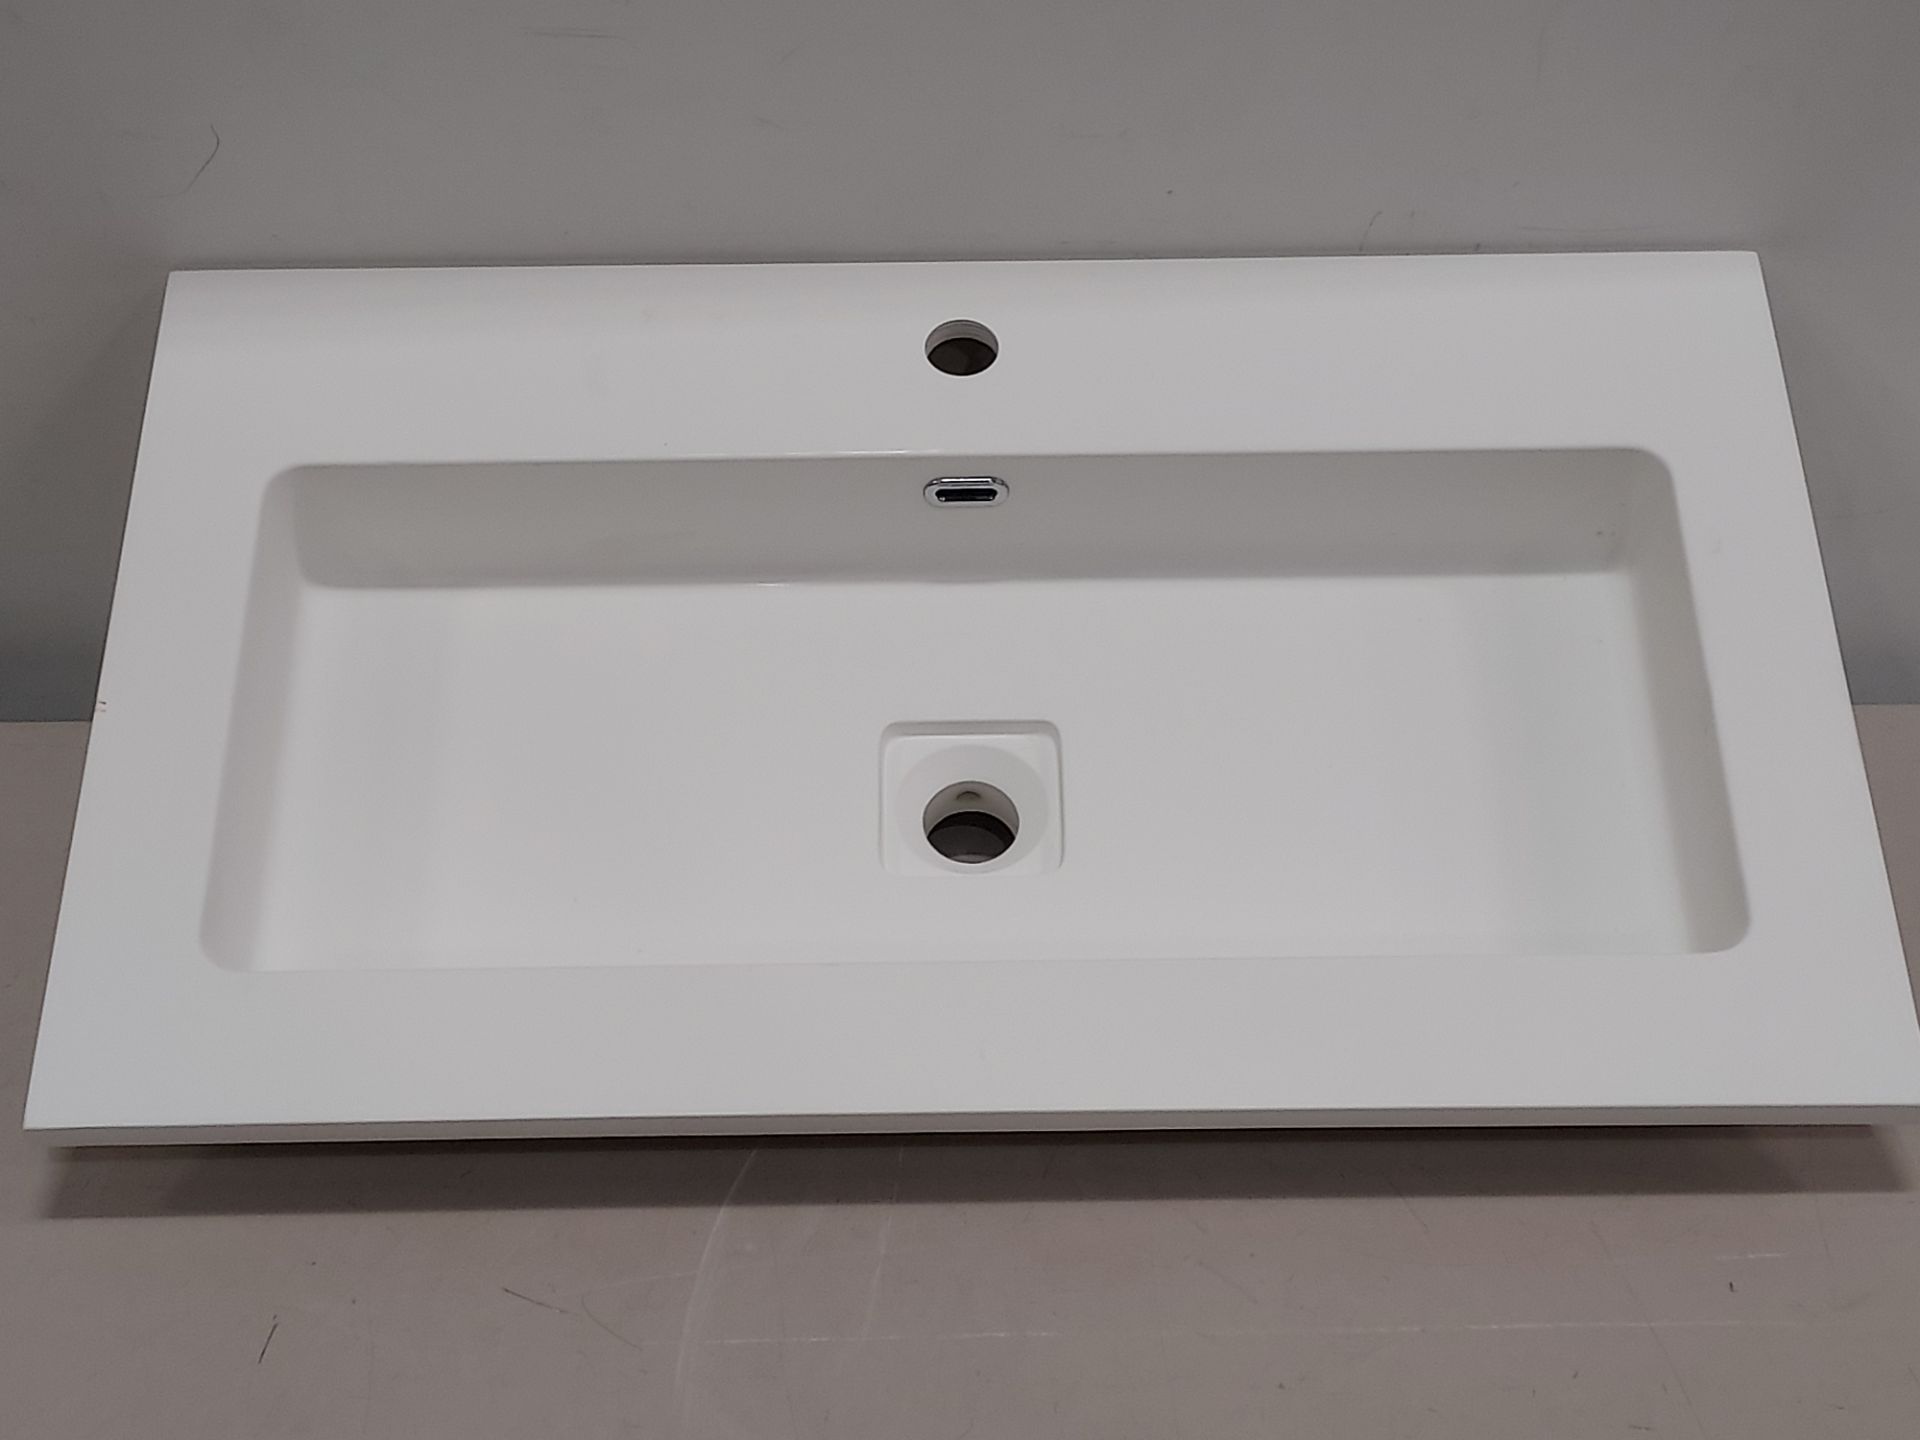 14 X BRAND NEW CAVALIER SOLID SURFACE BASINS INCLUDES CHROME WASTE PLUG AND CLEANING PAD ( CODE :